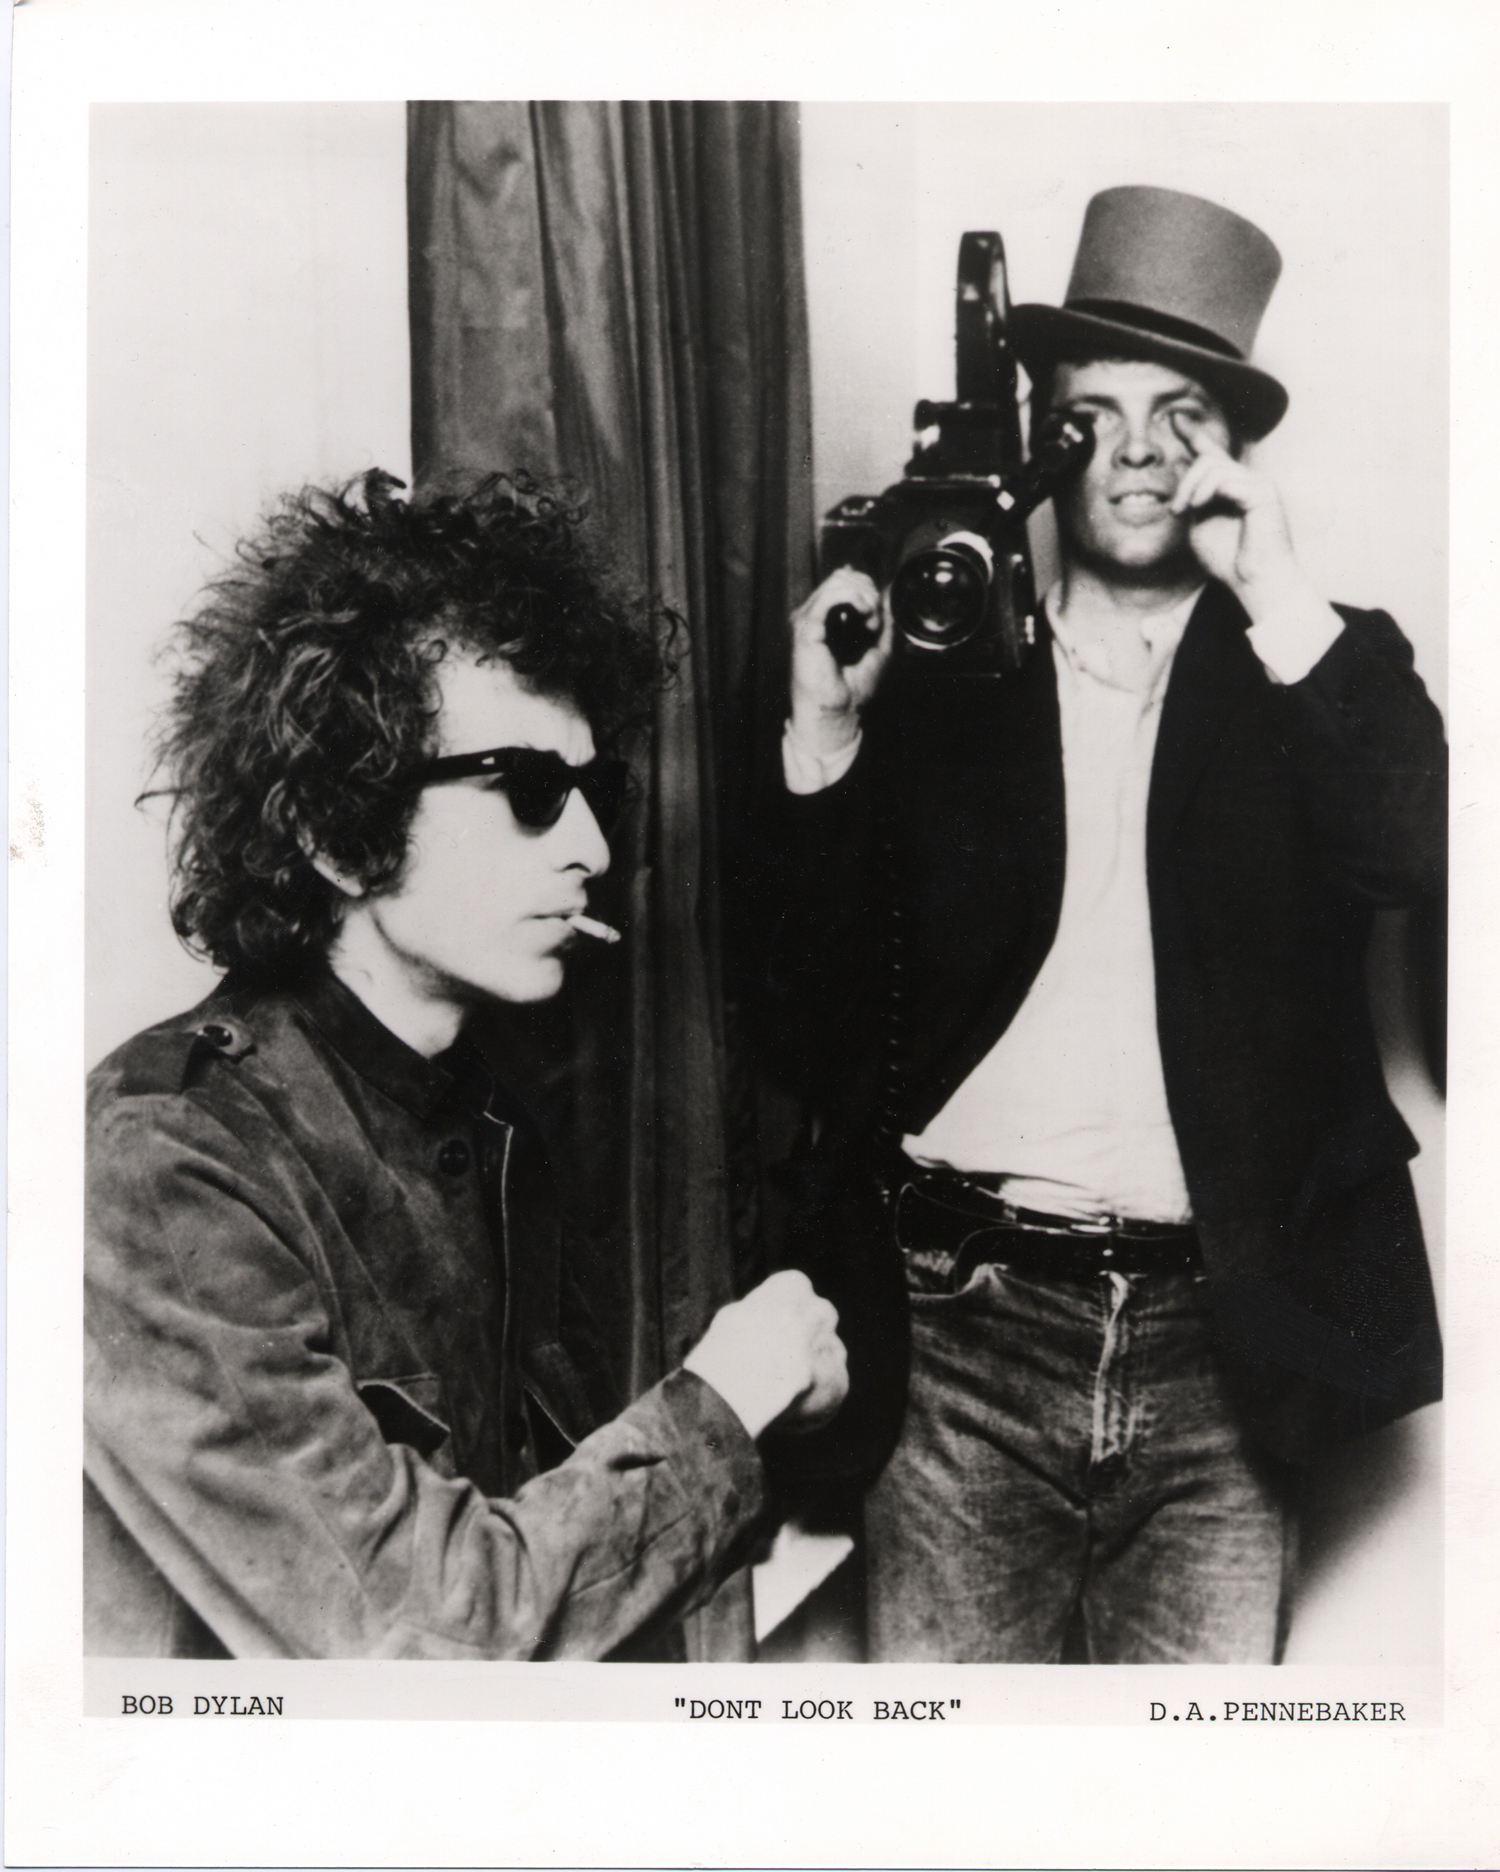 D. A. Pennebaker (right) and Bob Dylan during filming of Don't Look Back, 1965.